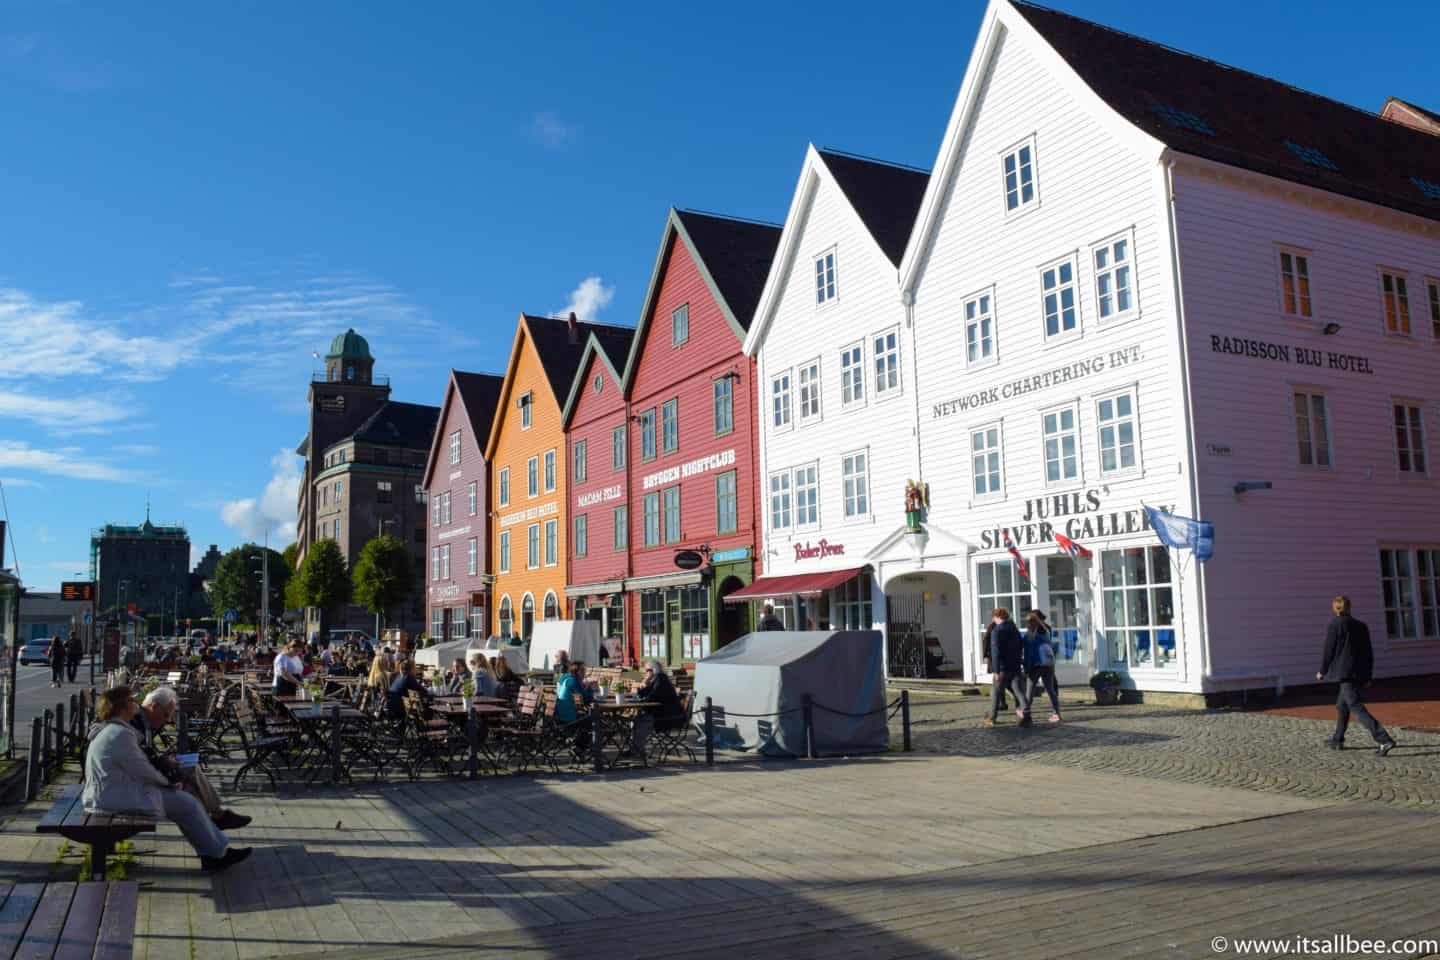 attractions in bergen | must see places in bergen norway | bergen top attractions | must see bergen | things to do in bergen norway